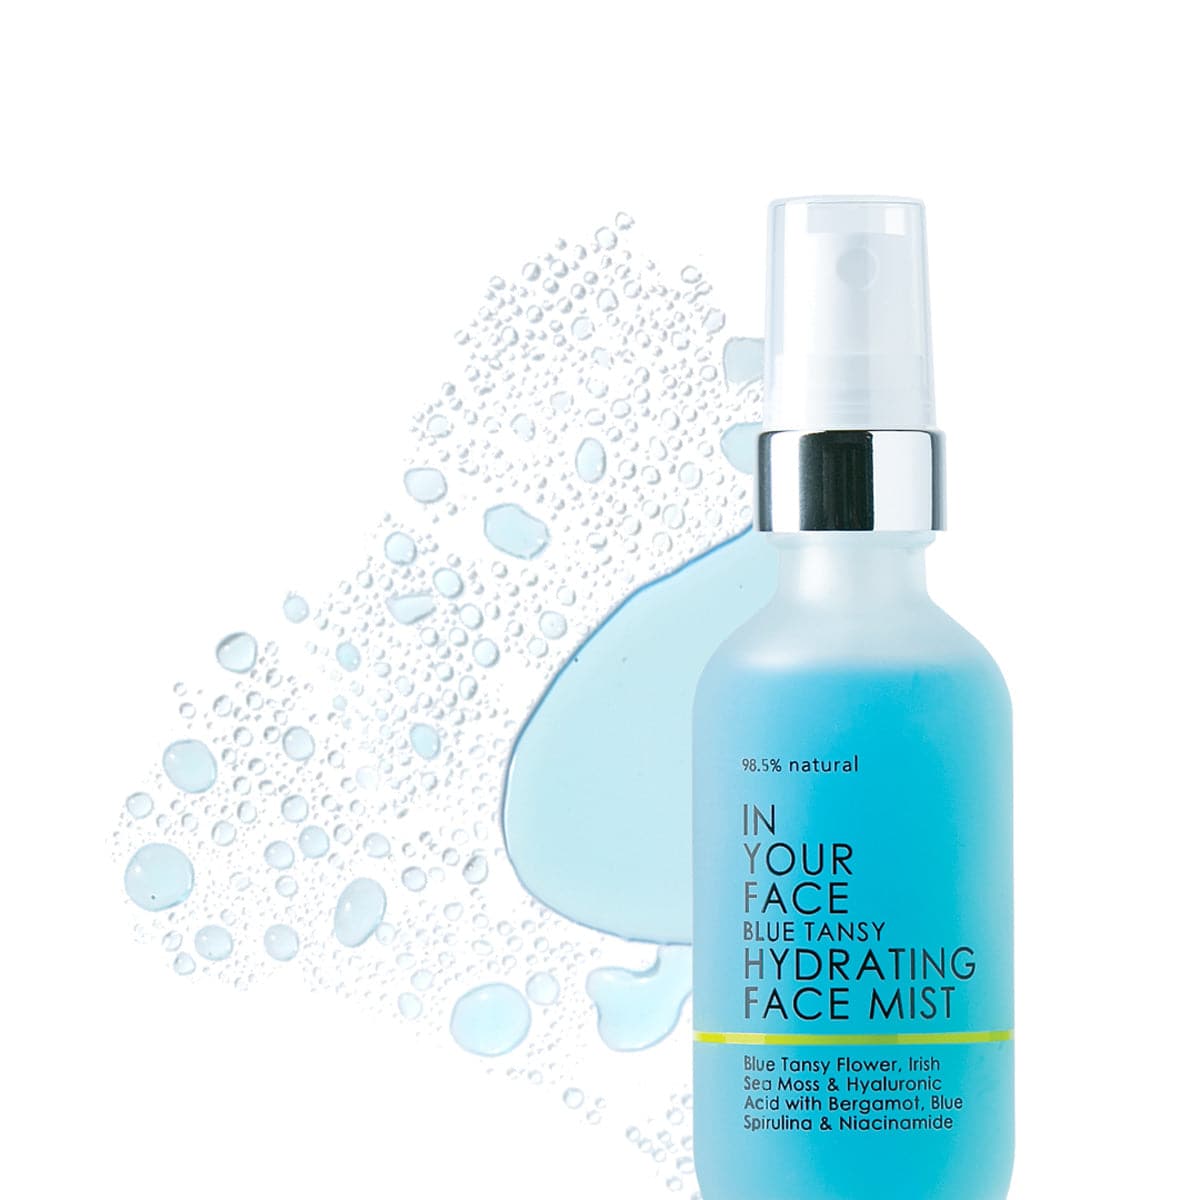 A bottle of the "98.5% natural IN YOUR FACE BLUE TANSY HYDRATING FACE MIST" on a white background. The bottle is clear but slightly frosted and is a bright blue color. The bottle also saying "Blue Tansy Flower, Irish Sea Moss & Hyaluronic Acid with Bergamot, Blue Spirulina and Niacinamide". Also is a splash of the toner on the side of the bottle showing the texture - liquid blue toner.